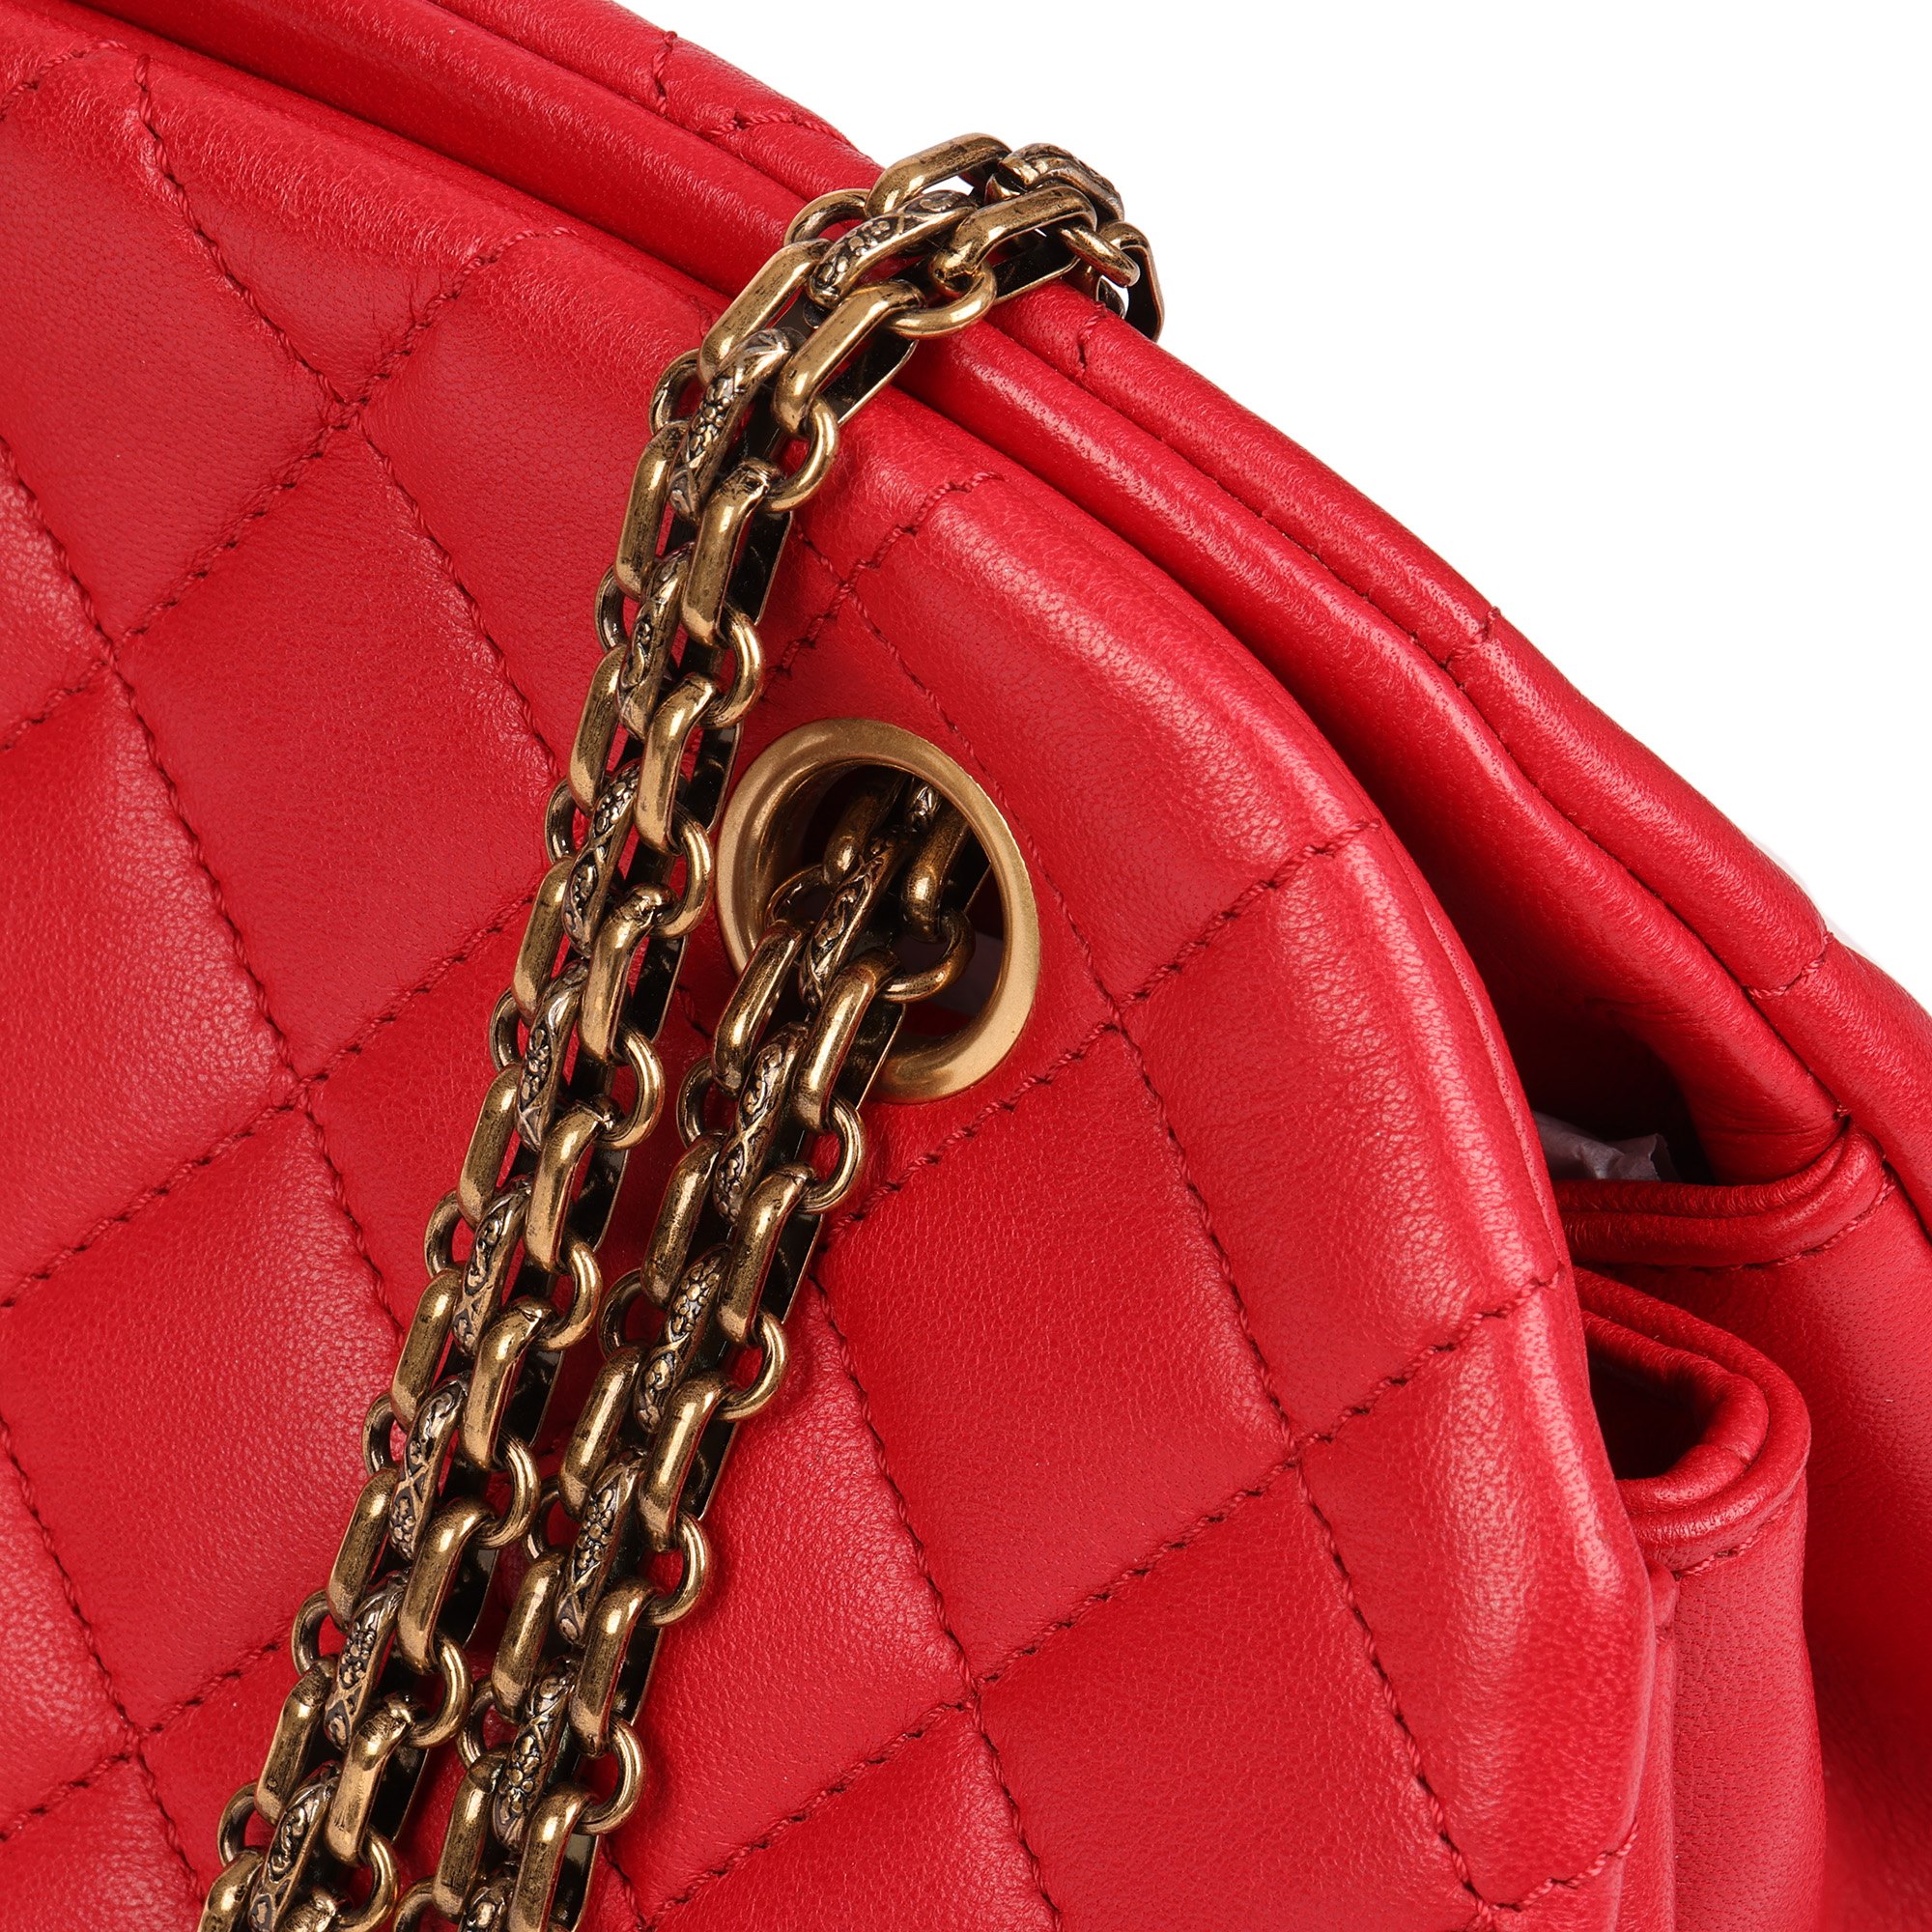 Chanel Red Quilted Lambskin Just Mademoiselle Bowling Bag